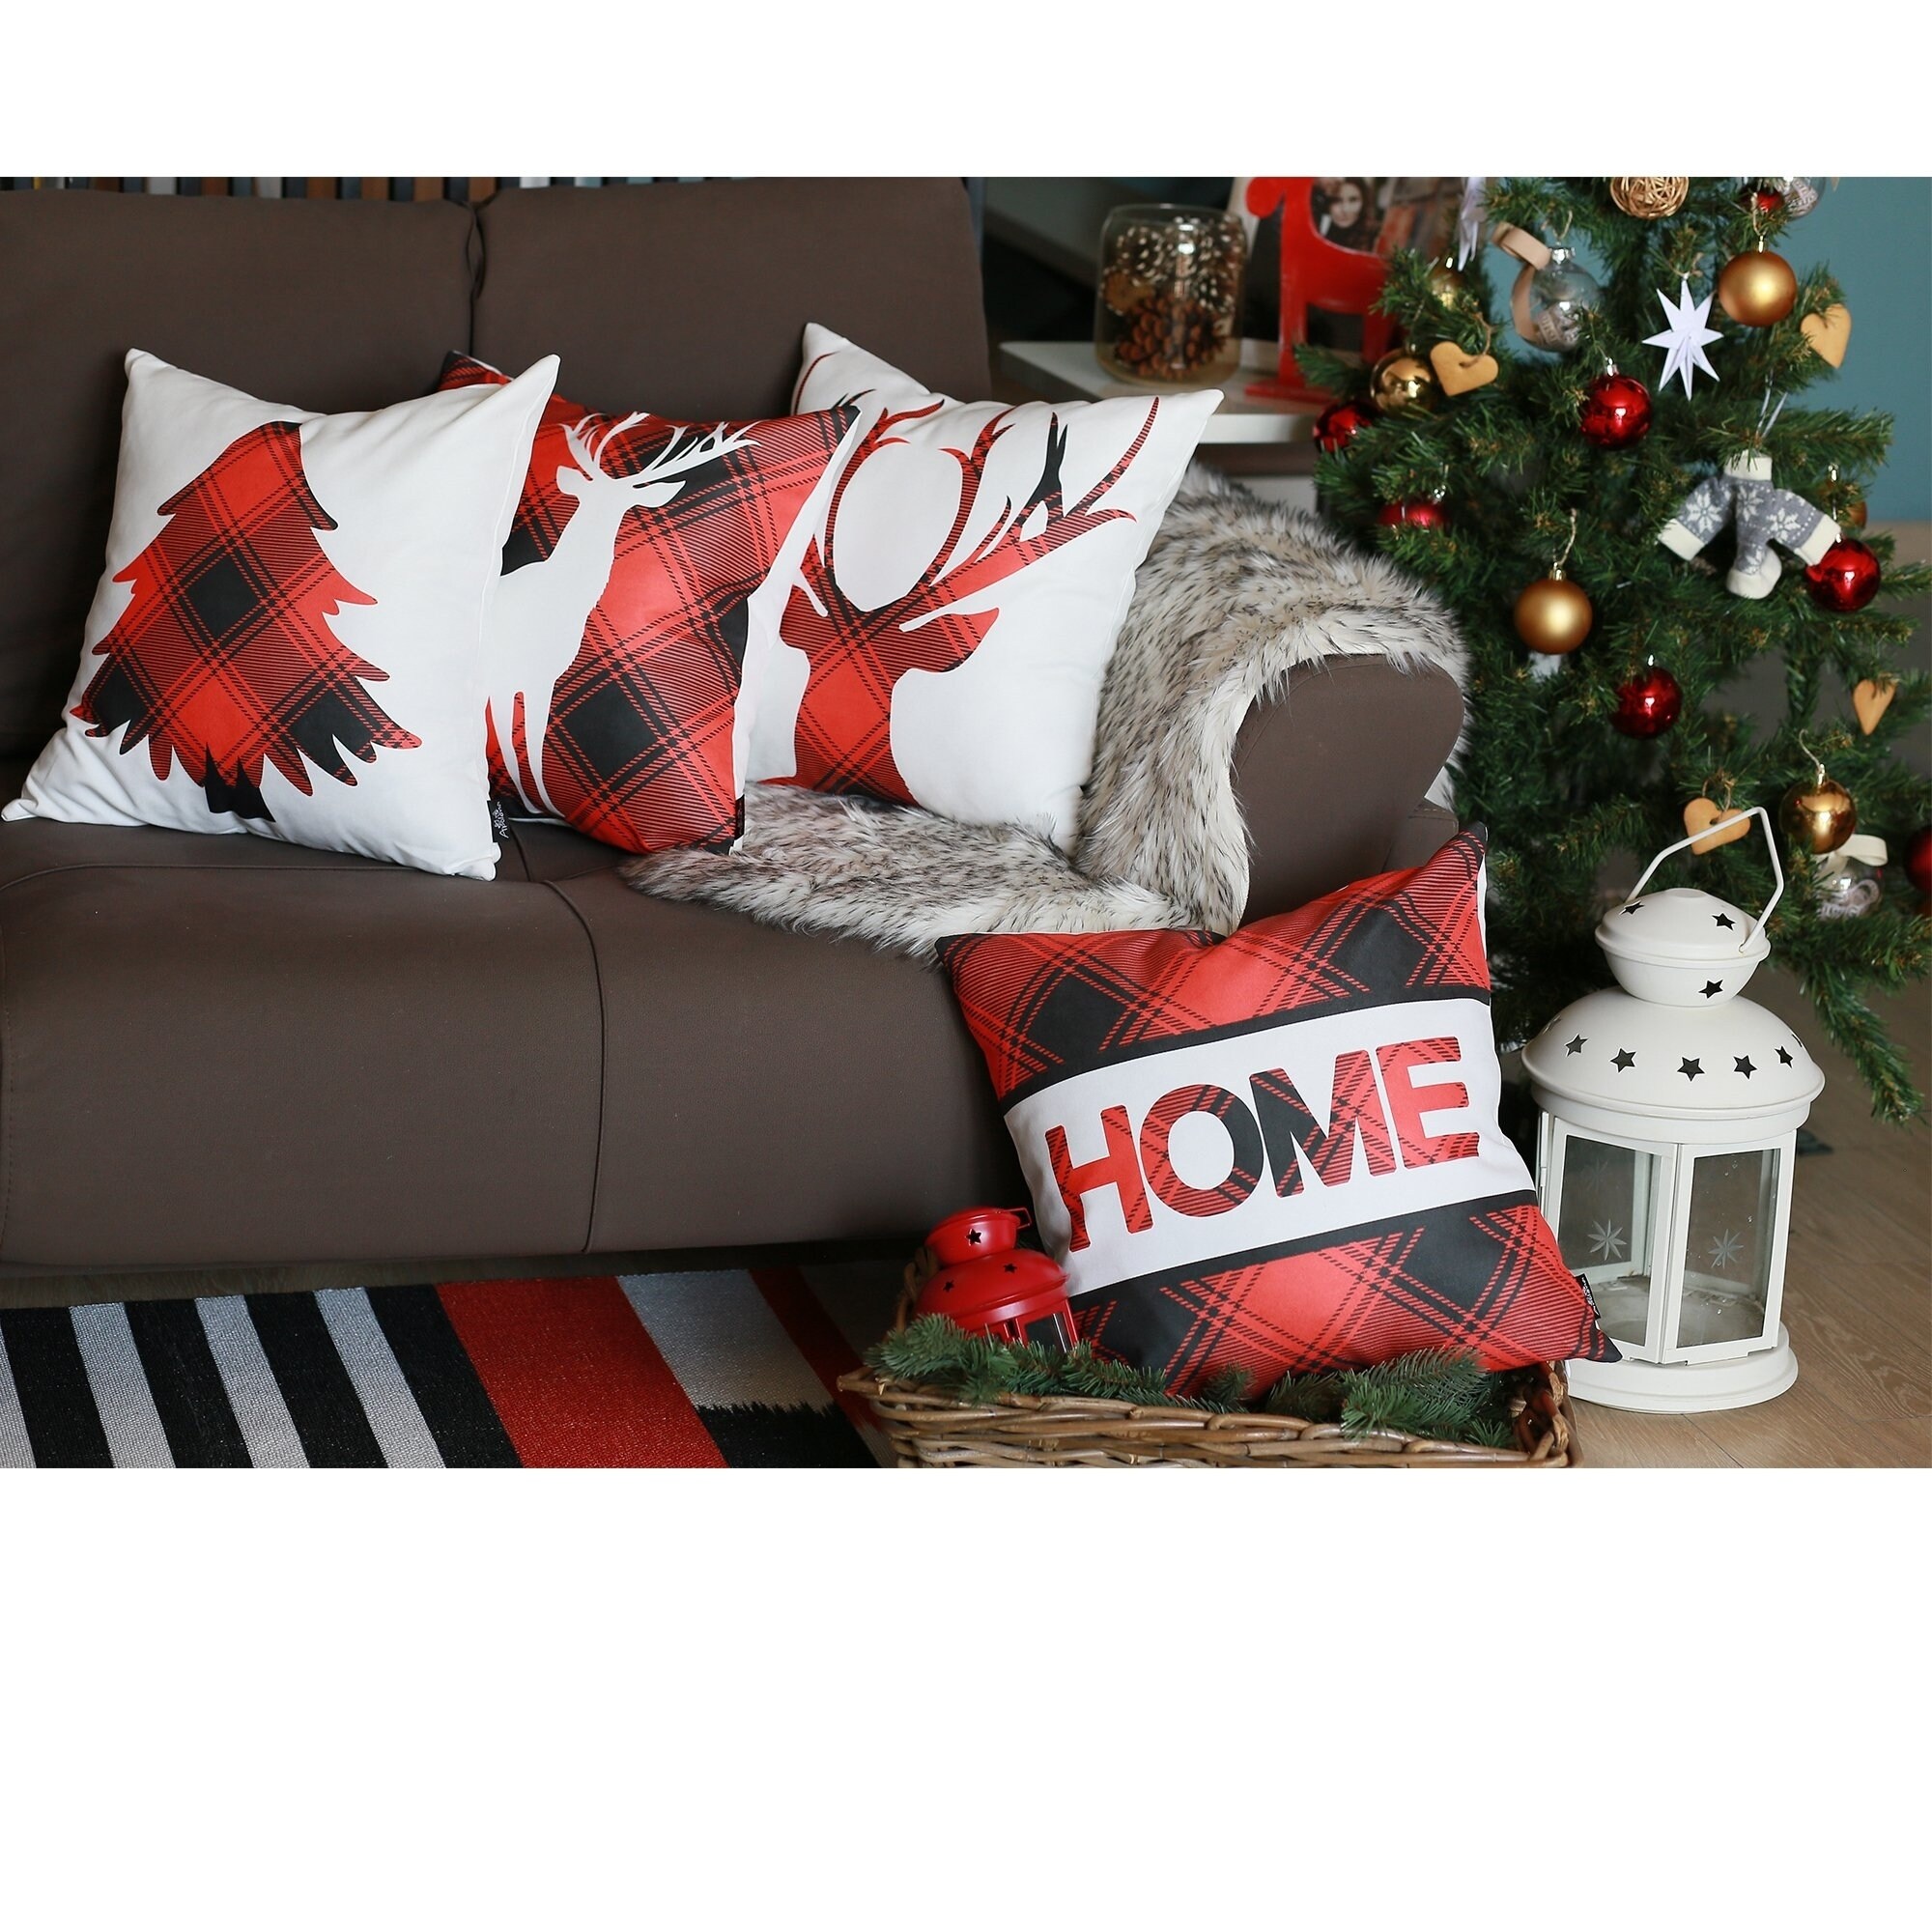 Christmas Tree and Elk Printed Decorative Holiday Series Throw Pillow with Inserts, Red, 18 inch x 18 inch, Set of 4